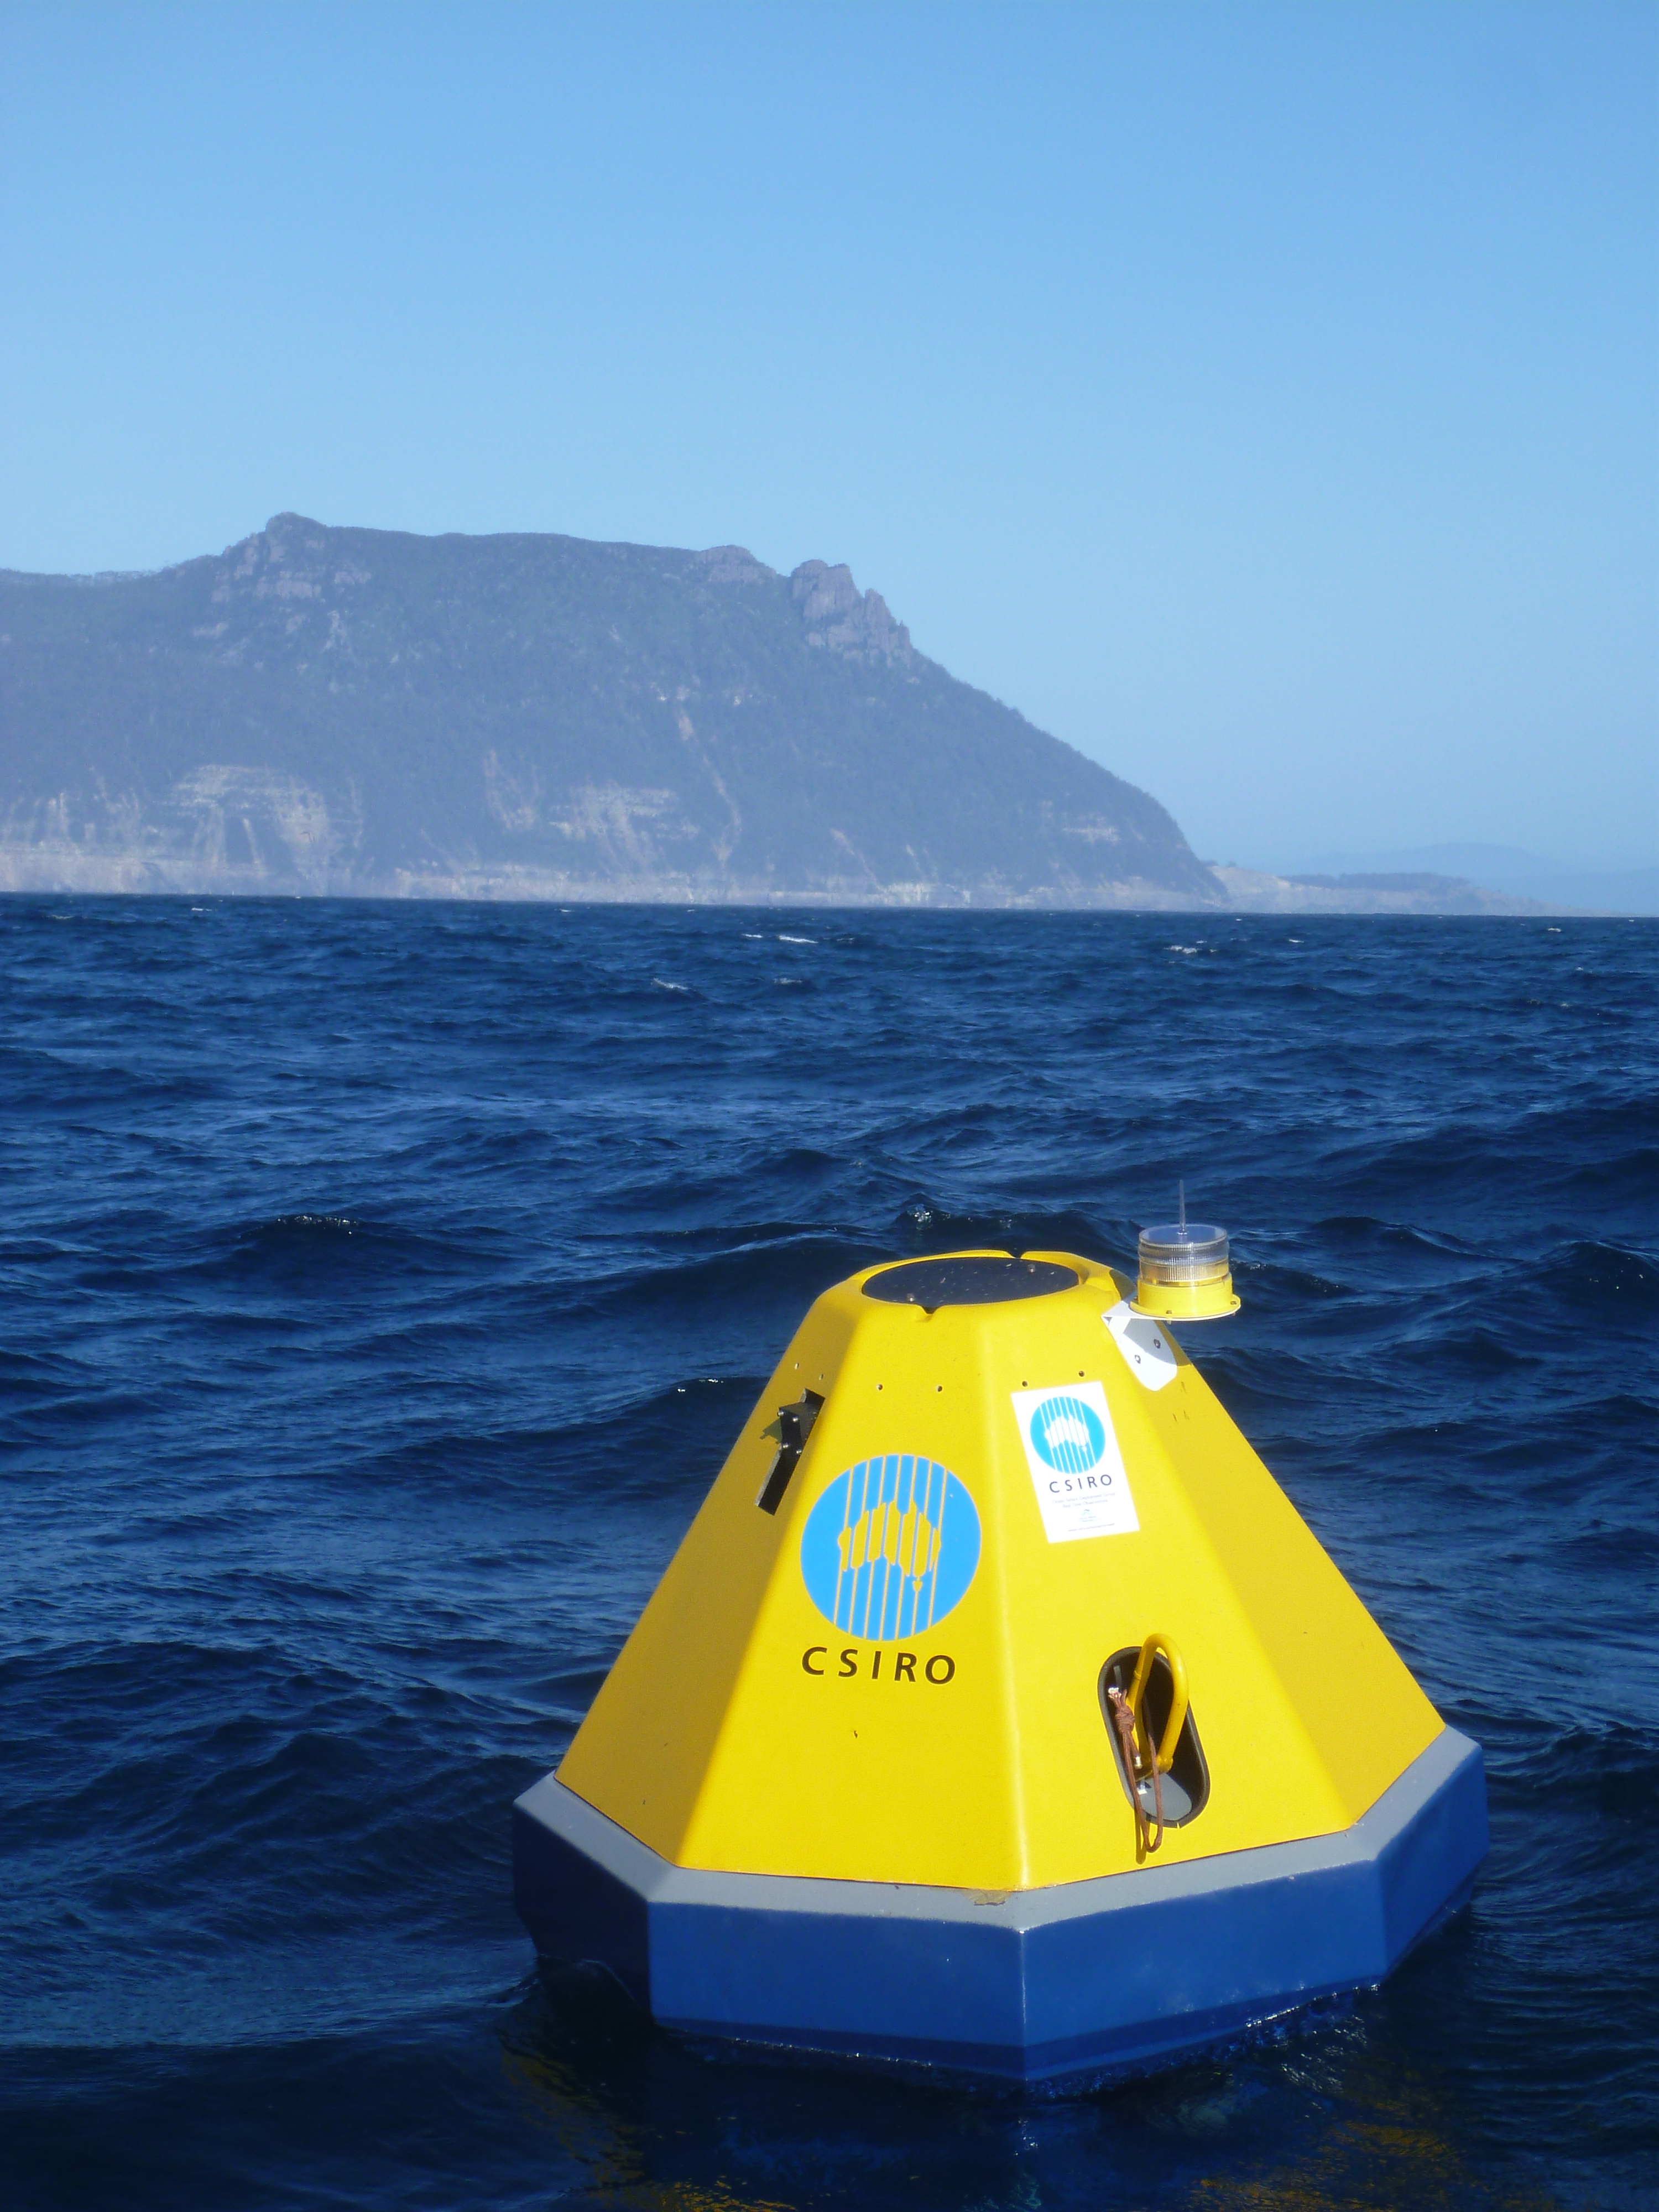 Meet our new mooring! This clever beast will help detect acidity levels in our precious Aussie oceans.